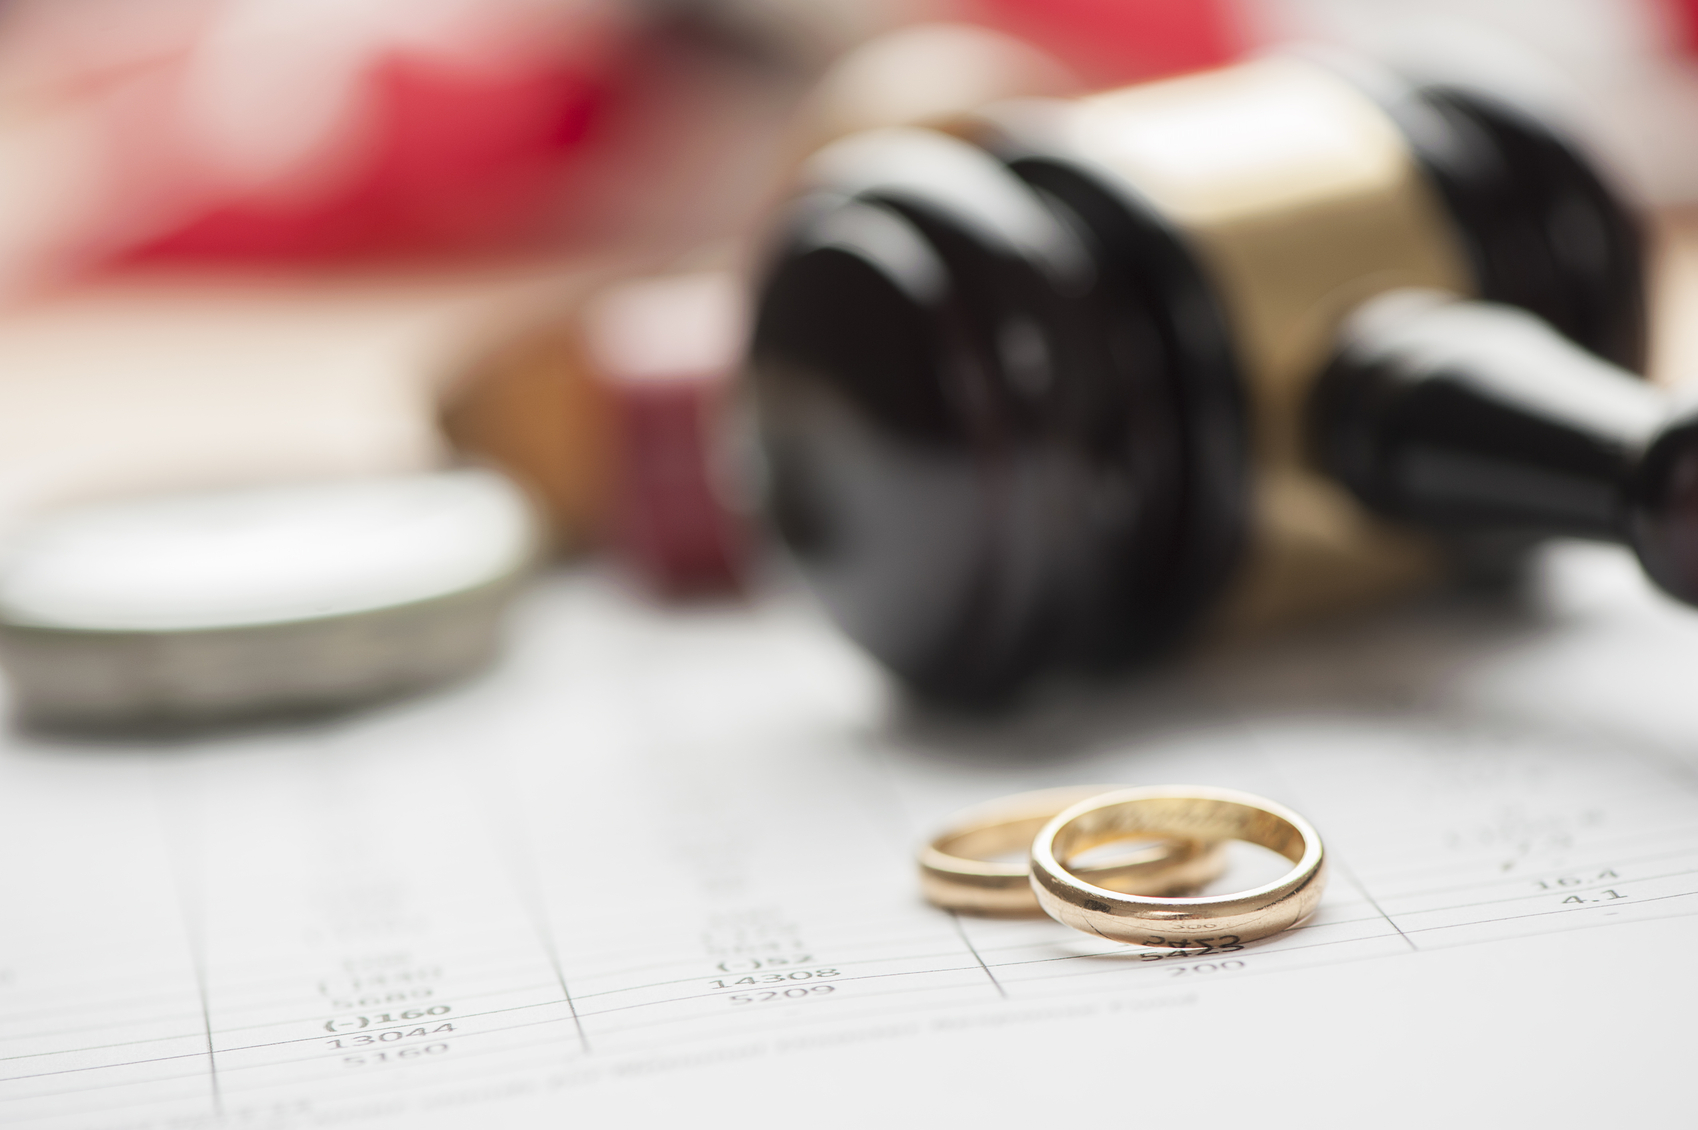 How to File for Legal Separation in New Jersey